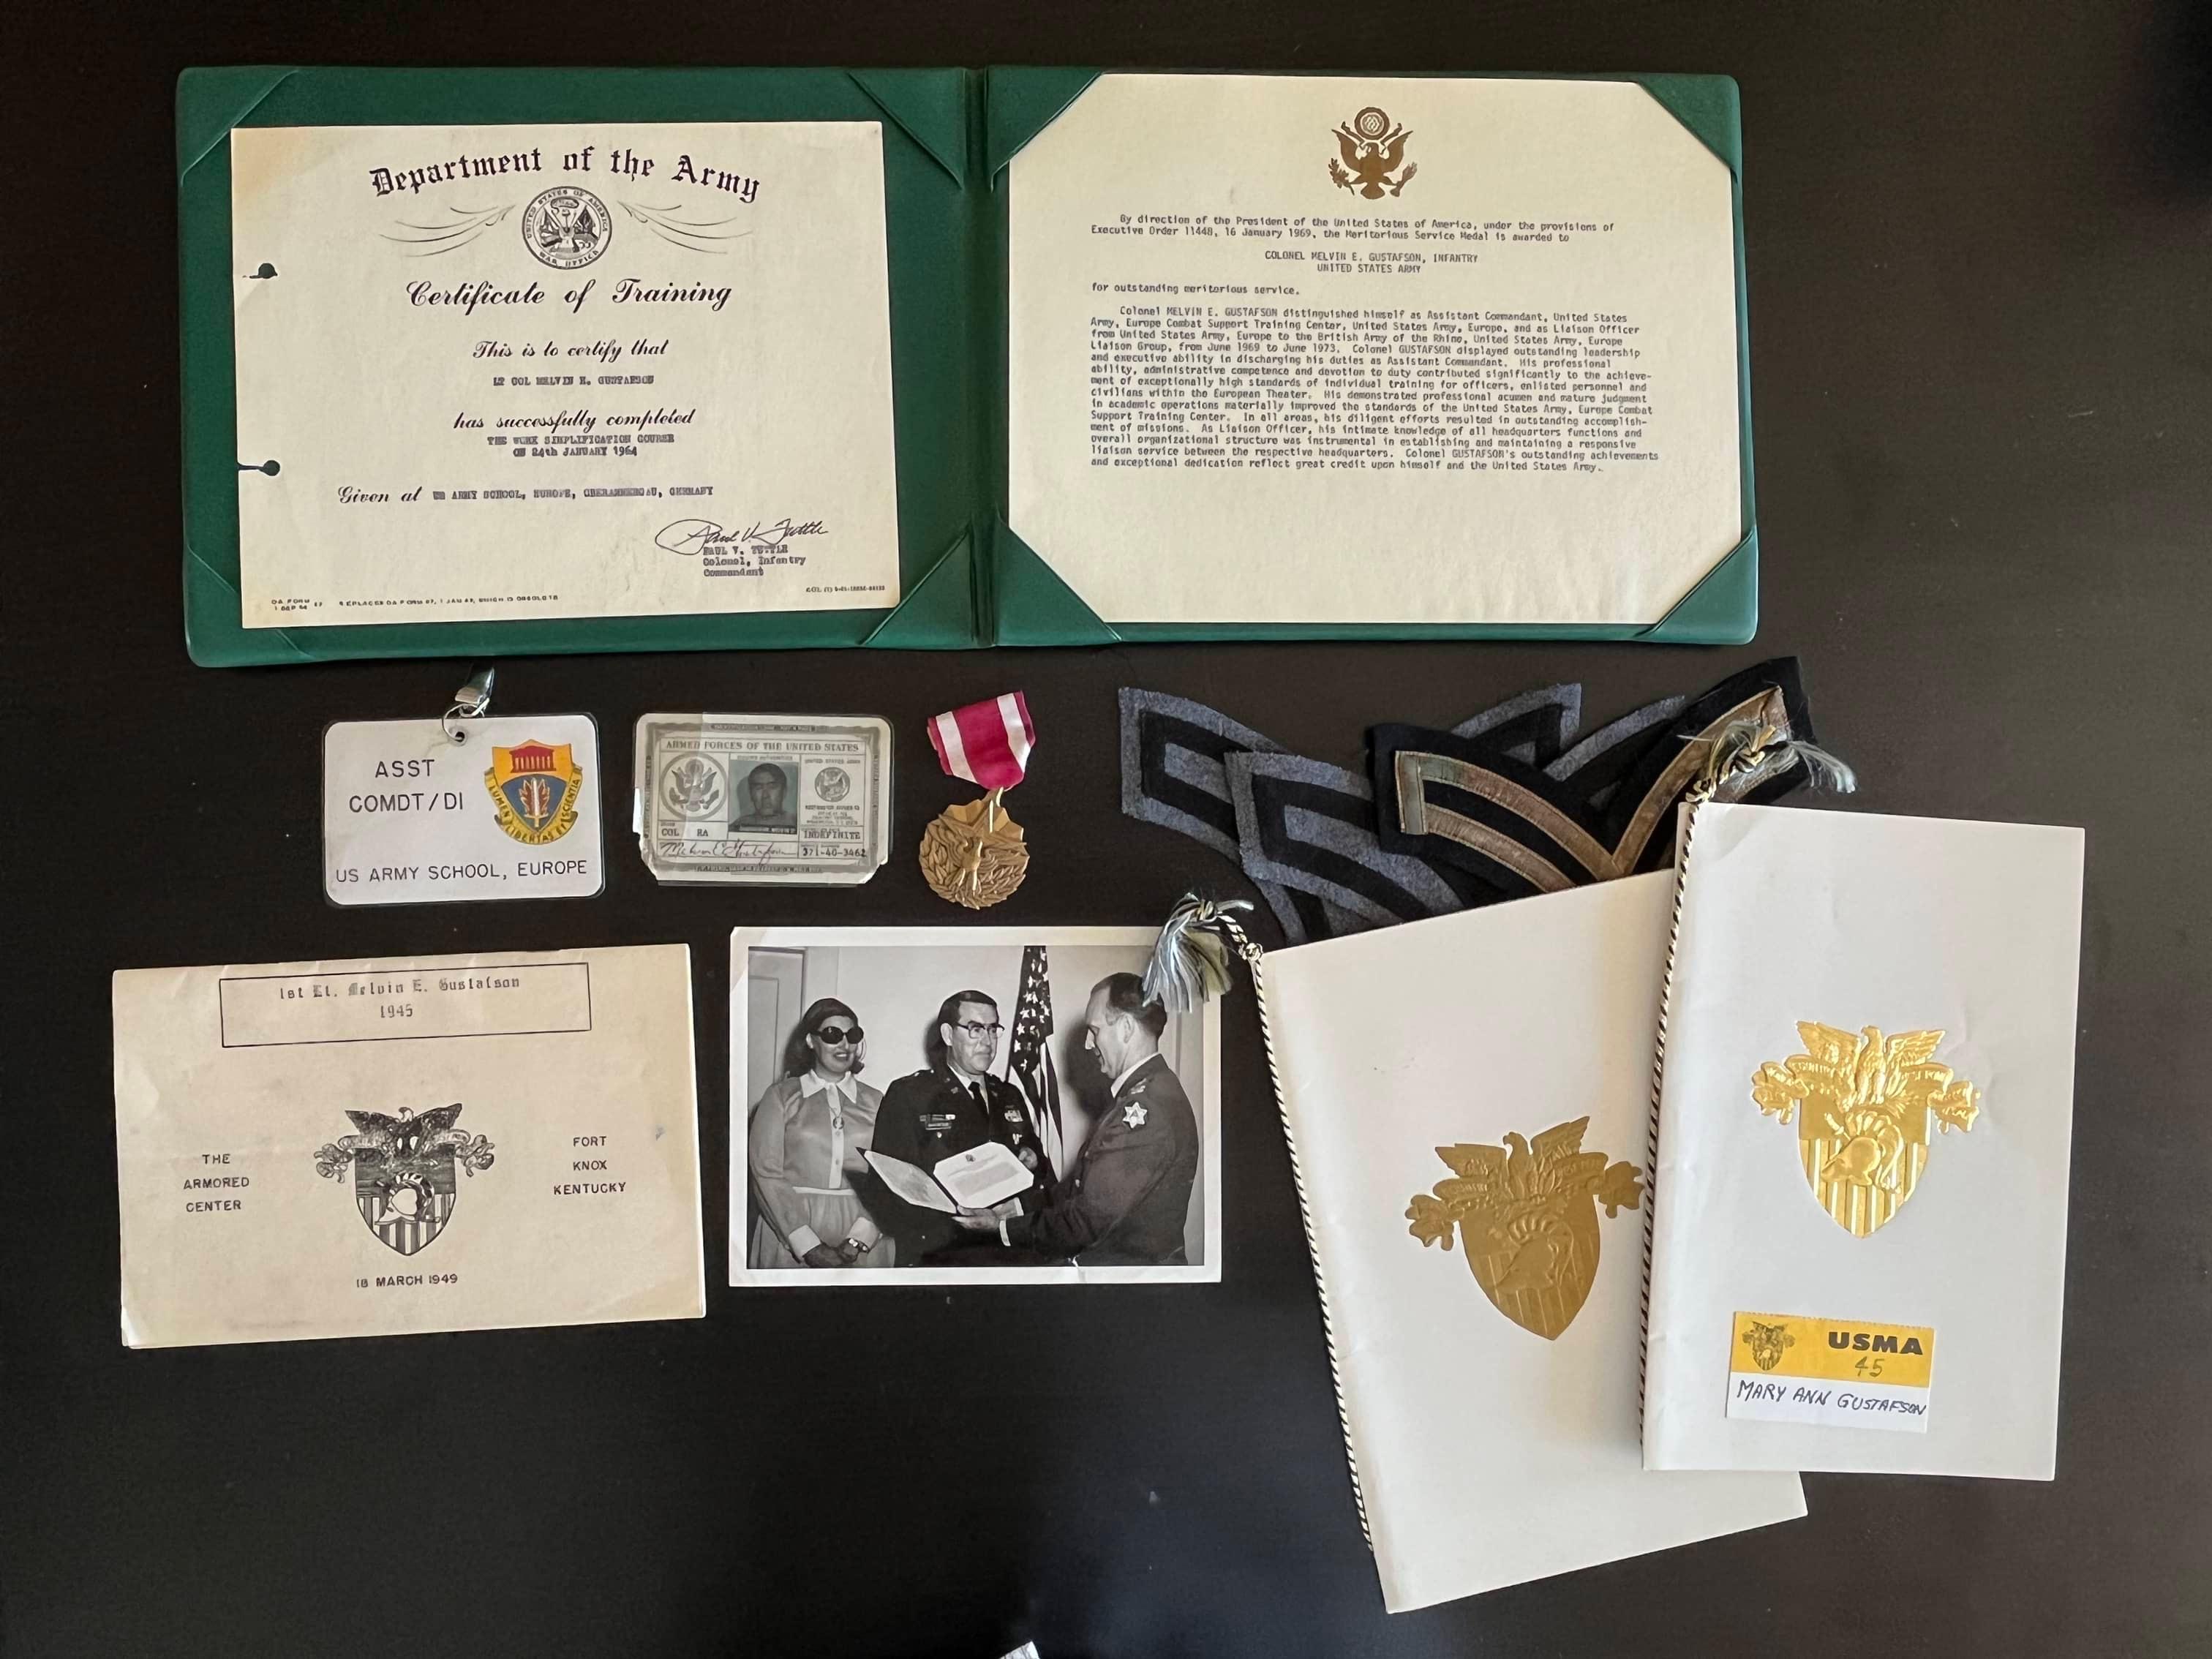 Lot to a 1945 West Point U.S. Army Officer/Graduate